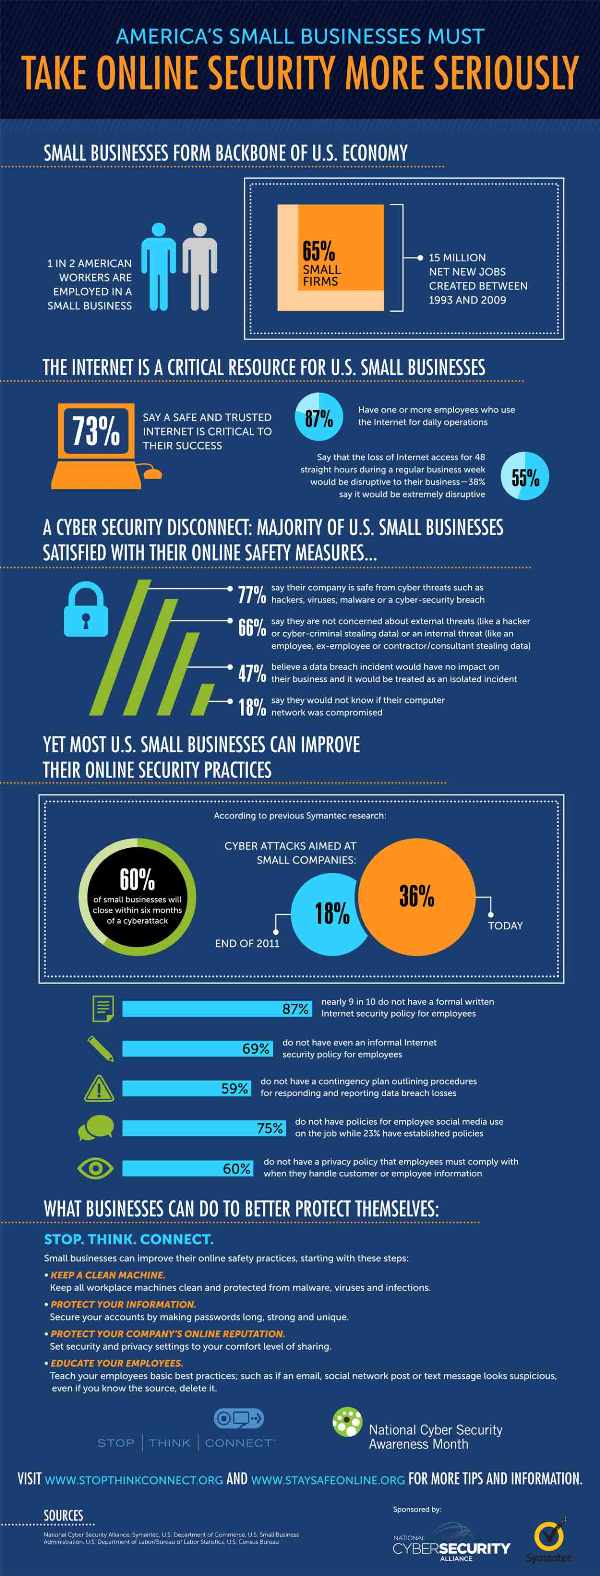 Network Security Vulnerabilities Infographic | LightEdge Solutions